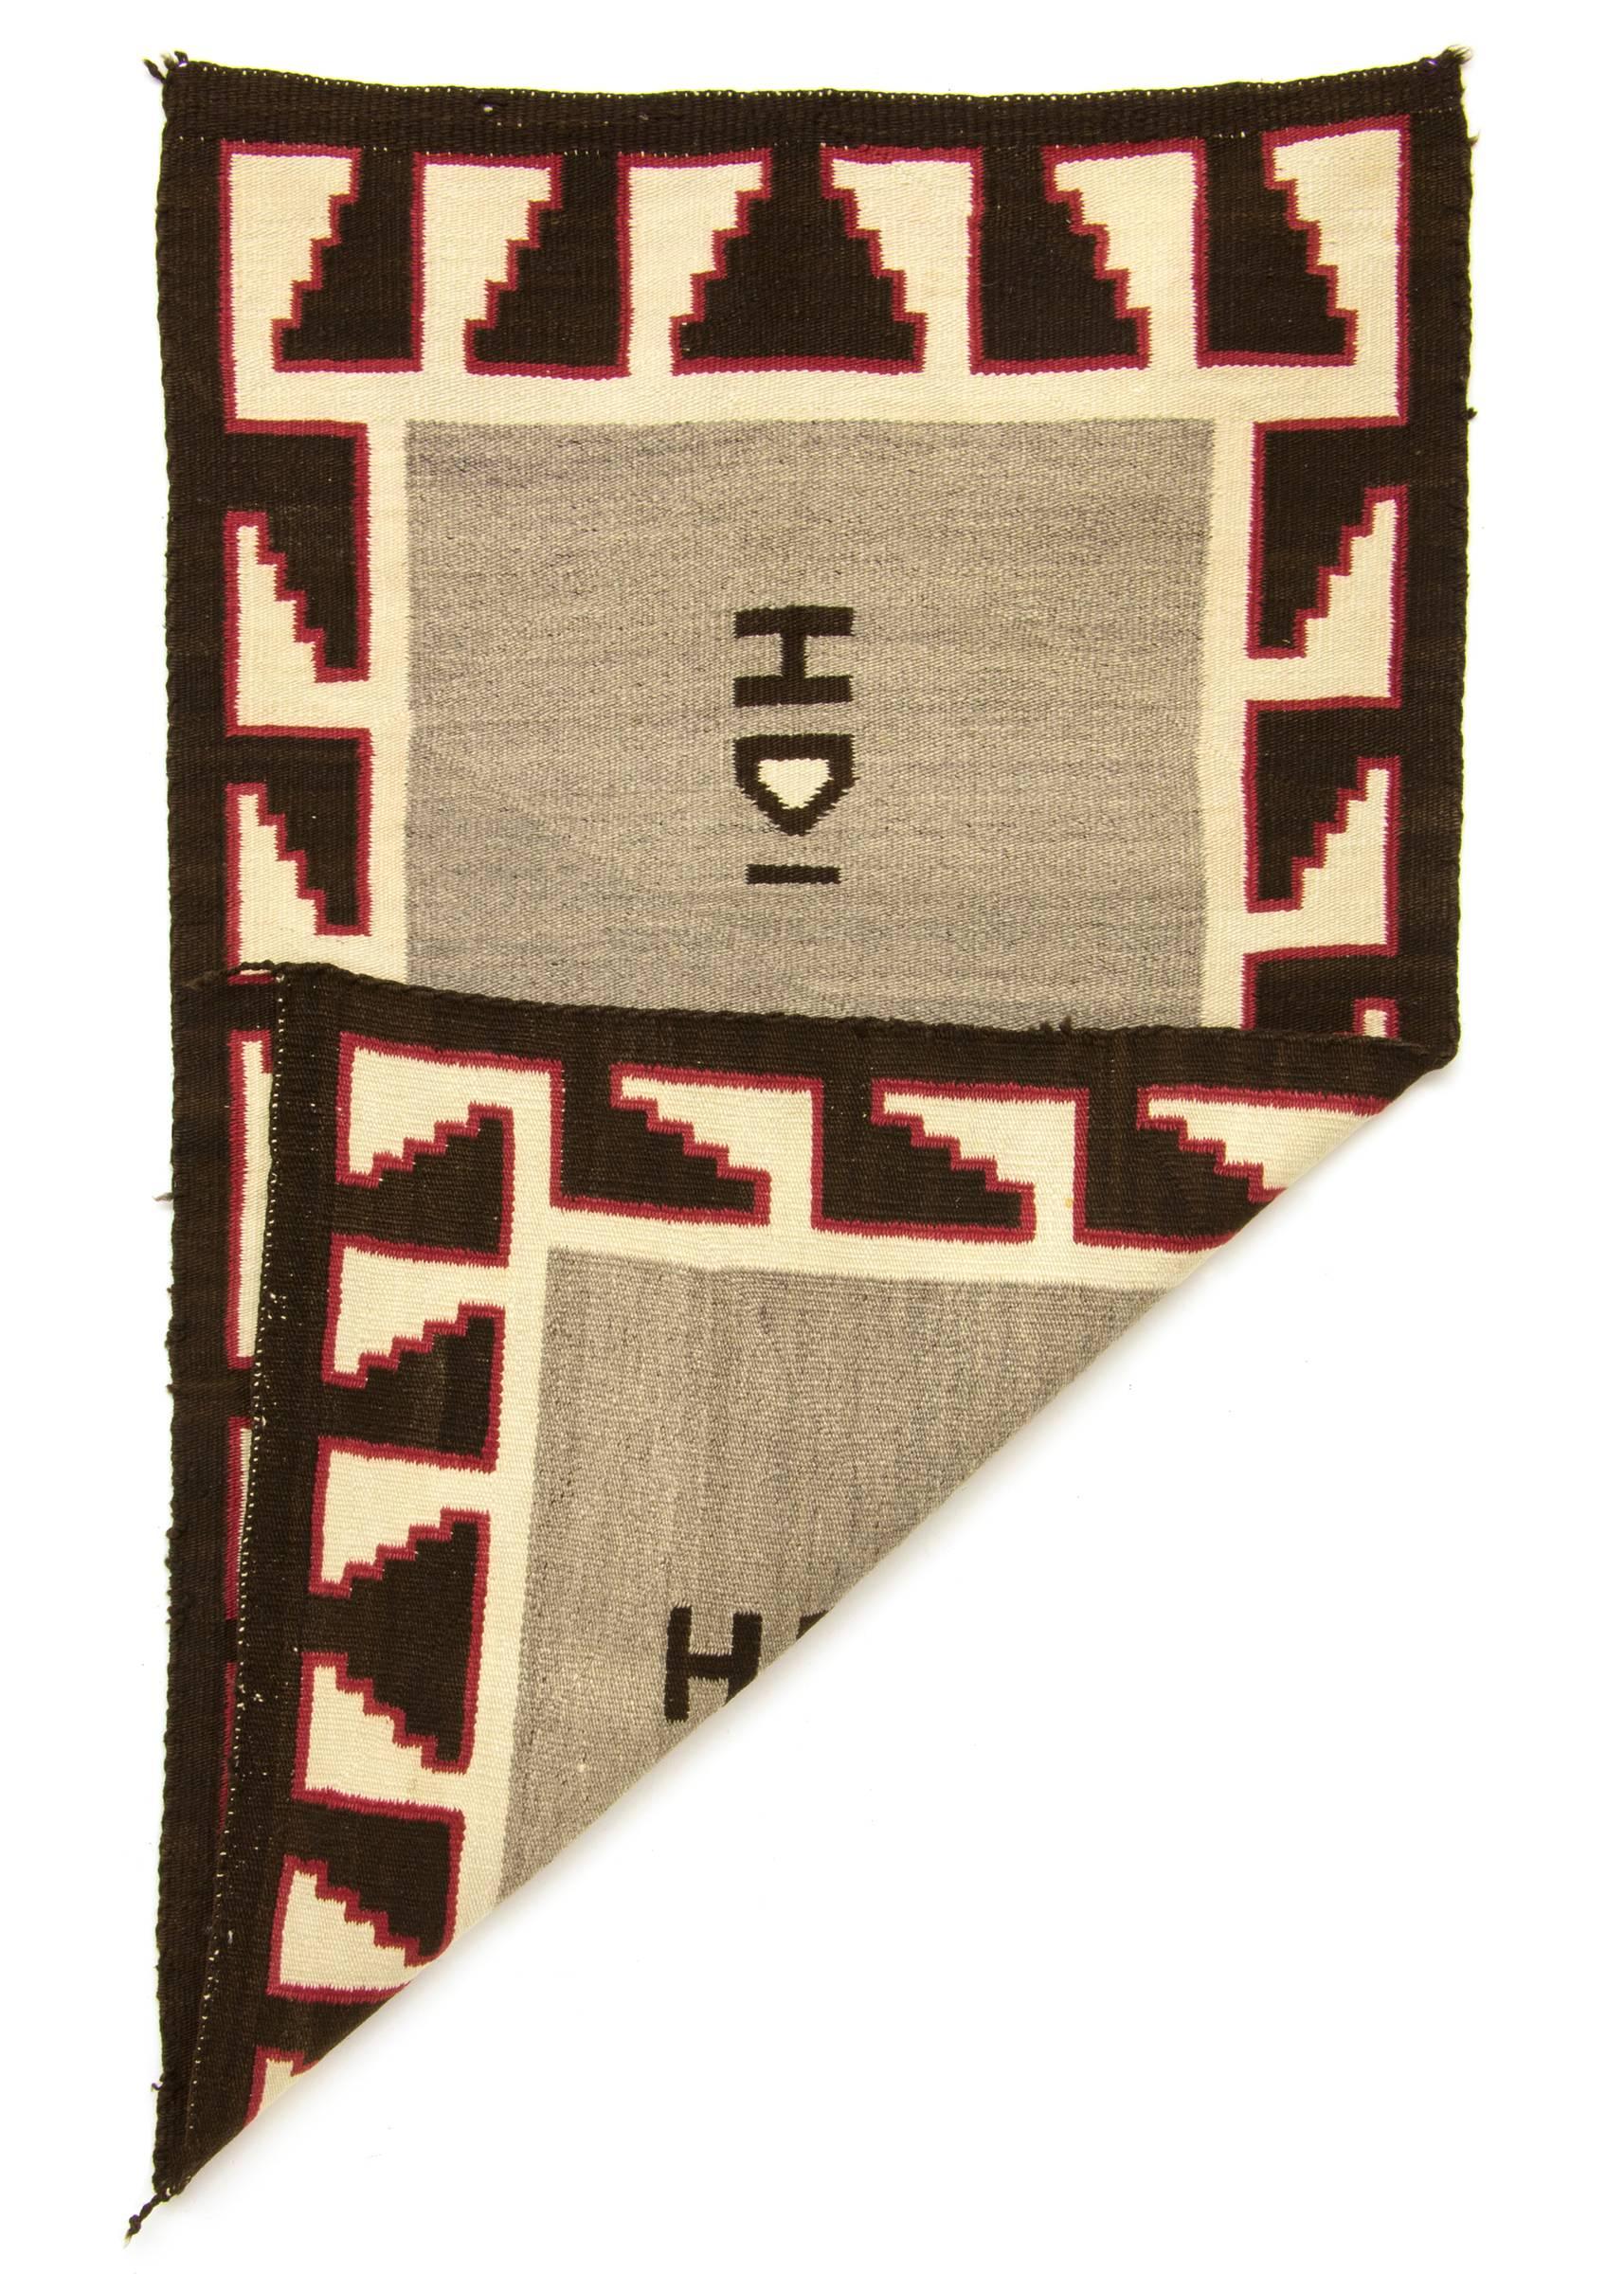 A double saddle blanket woven of native hand-spun wool in natural fleece colors of gray, ivory and brown/black with aniline dyed red. A geometric stepped border surrounds a gray field.